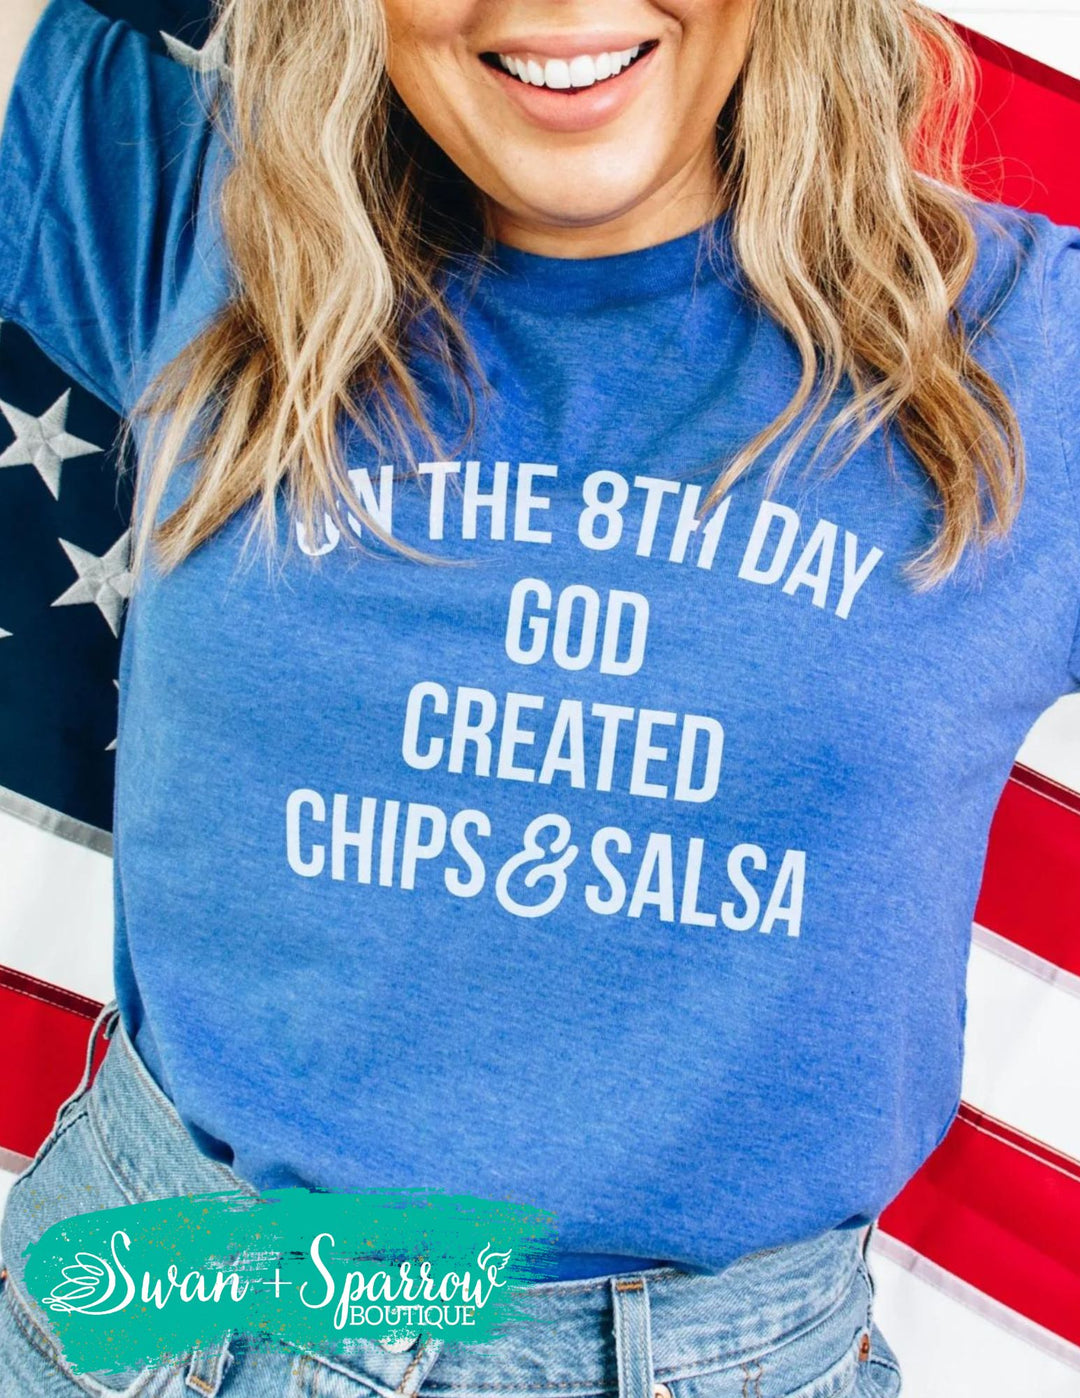 On the 8th Day God Created Chips and Salsa